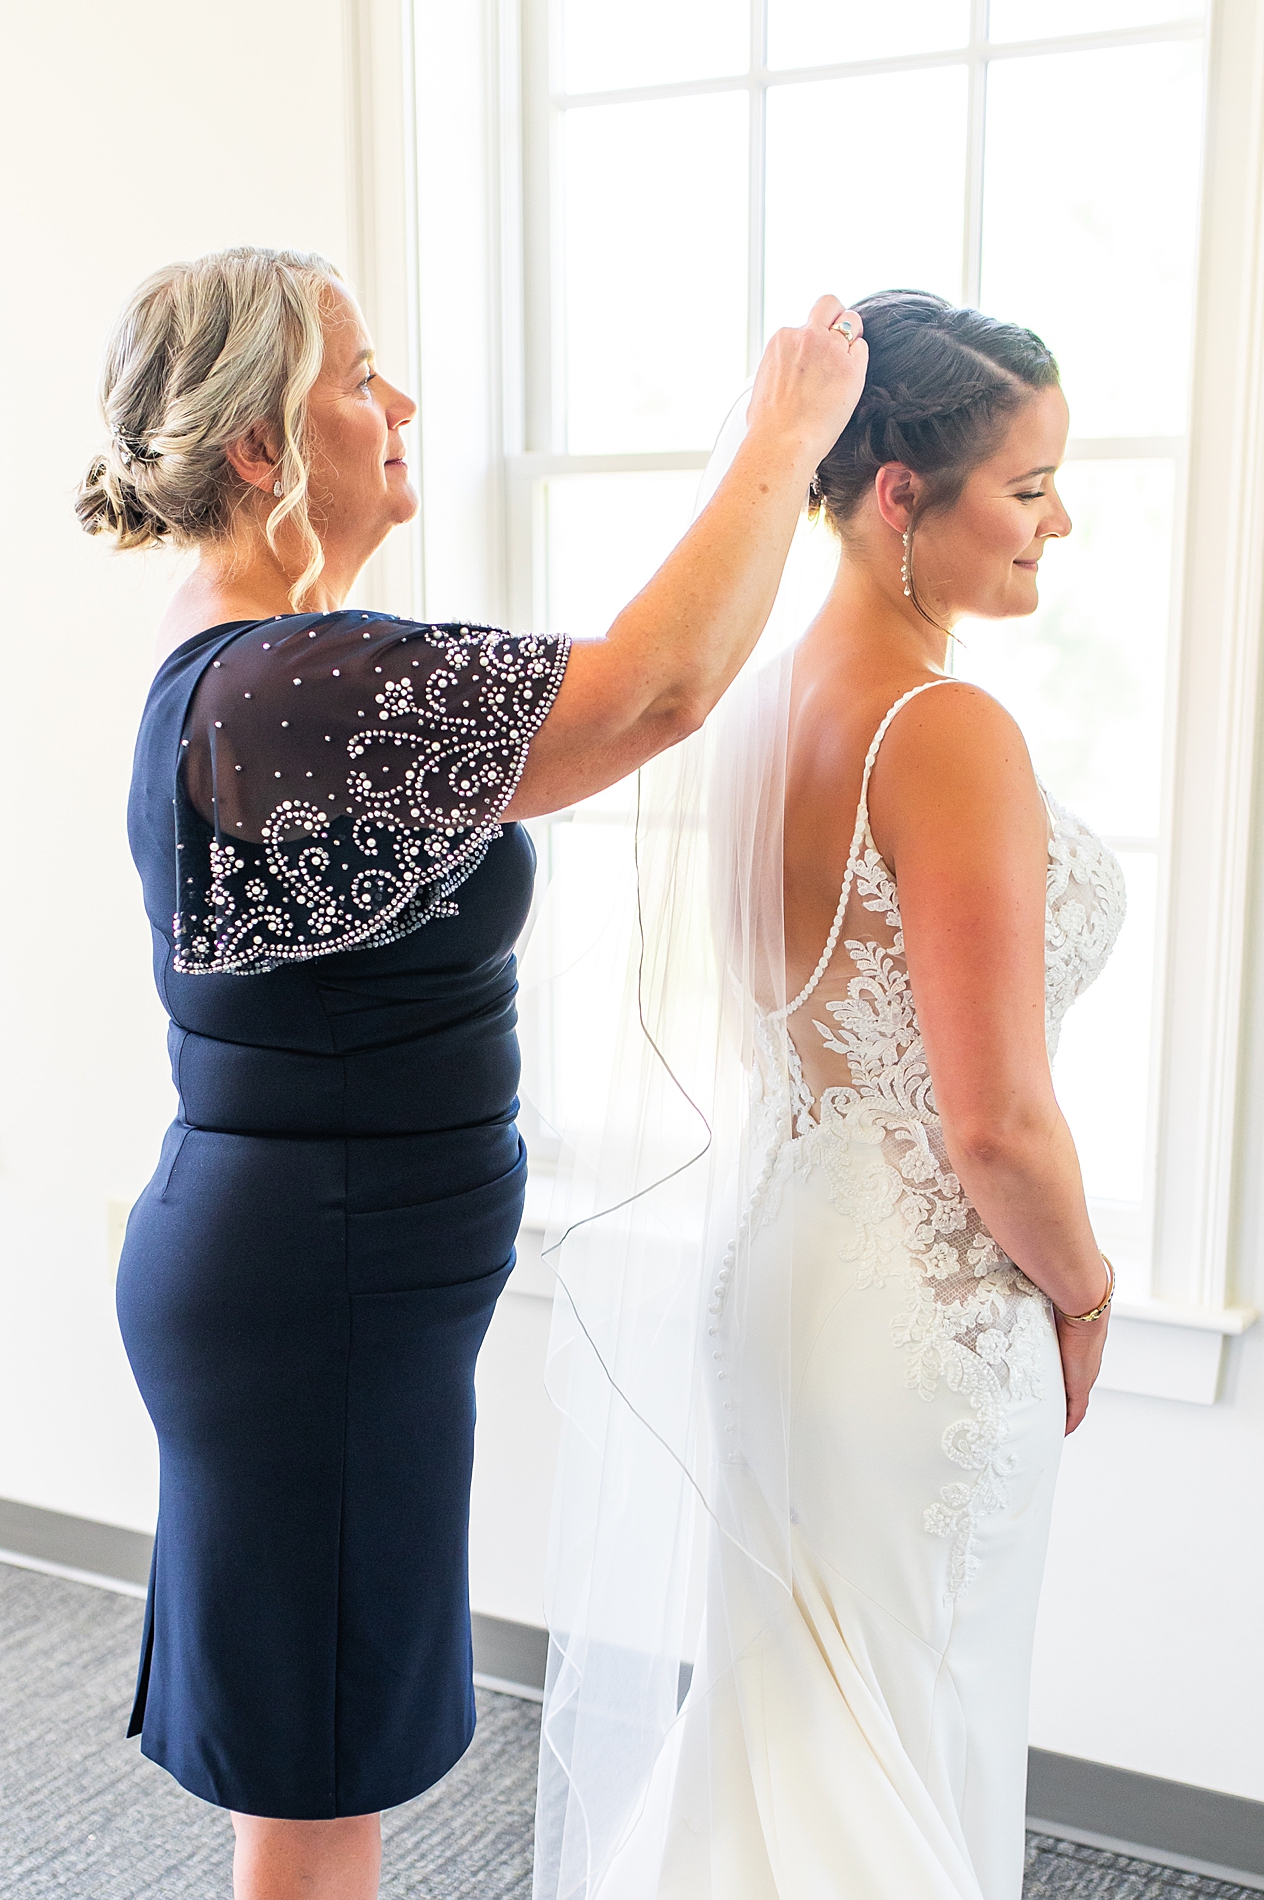 bride's mom helps her put on veil right before wedding